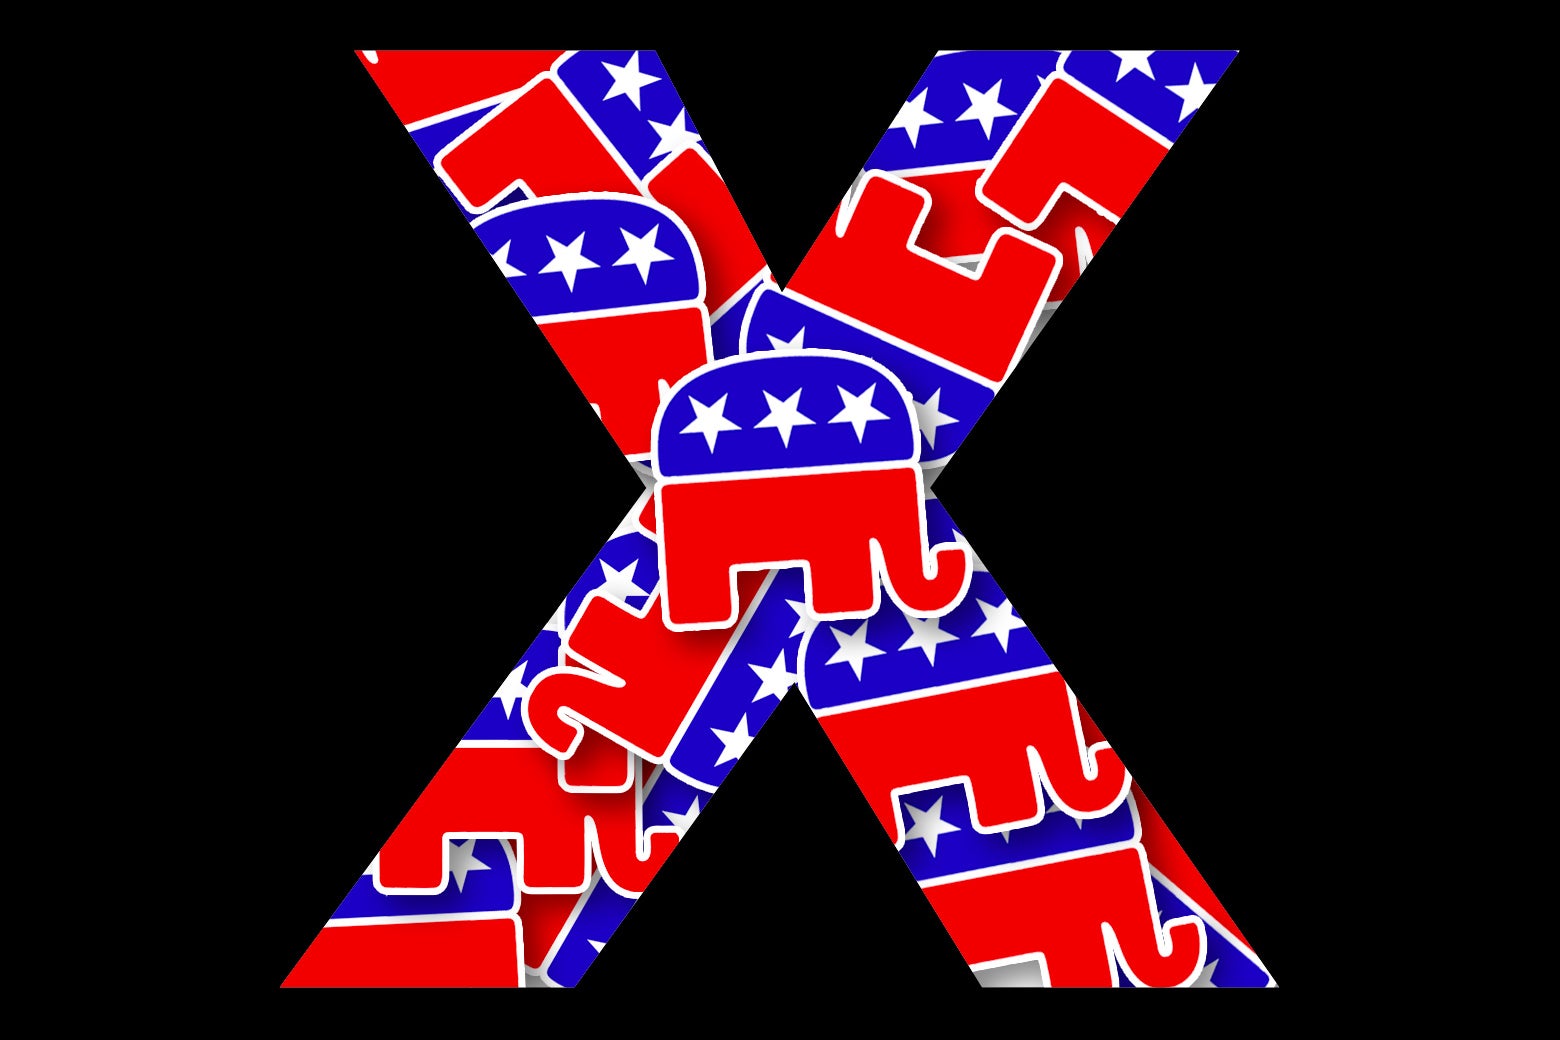 The letter X composed of red and blue to represent the Democratic and Republican parties.